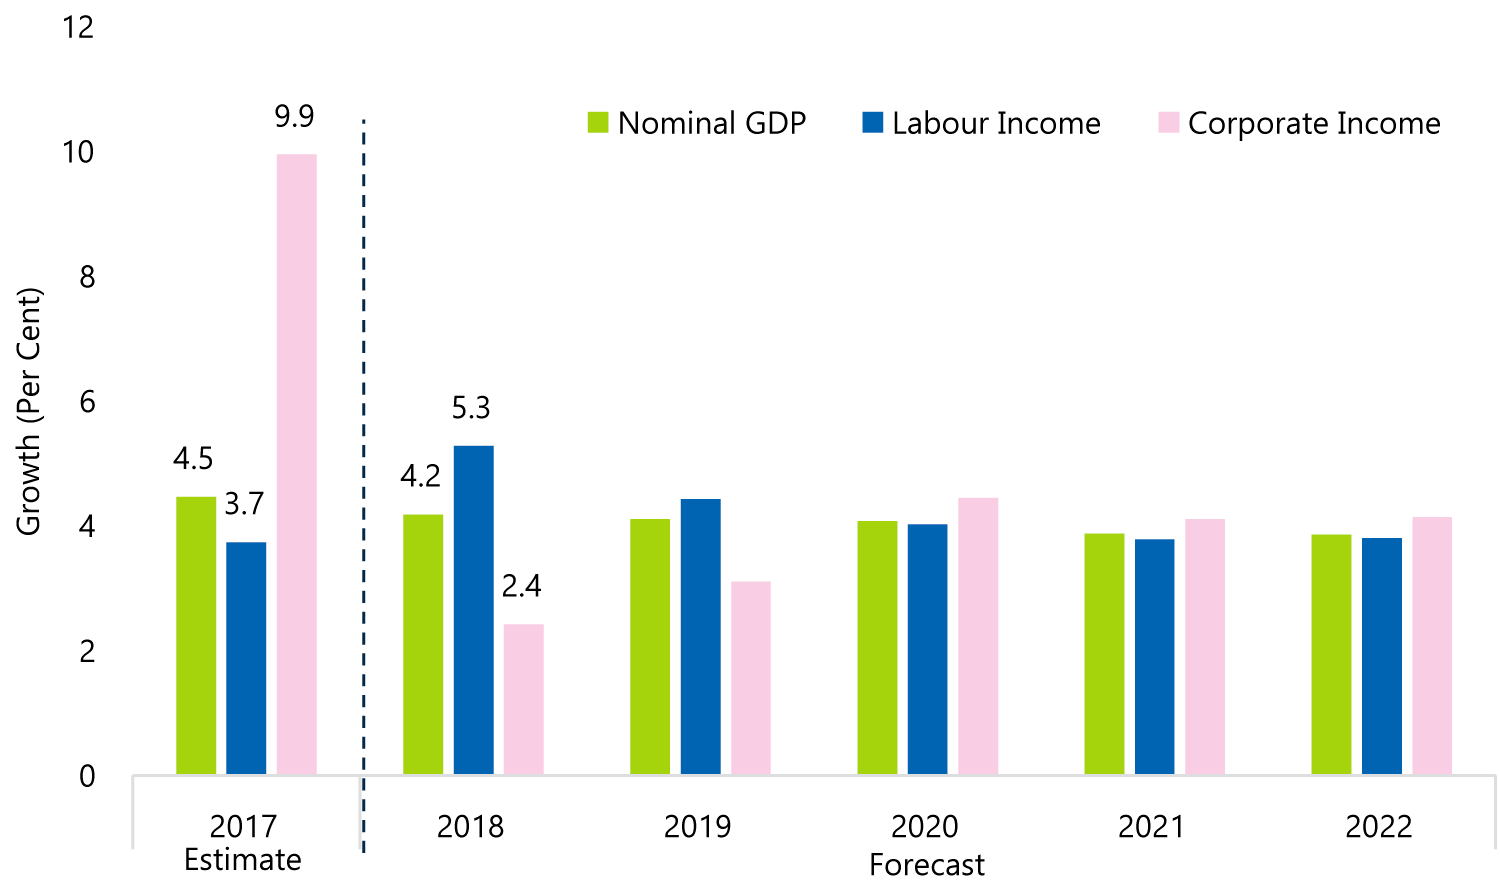 Labour Income to Lead Nominal GDP Growth in 2018